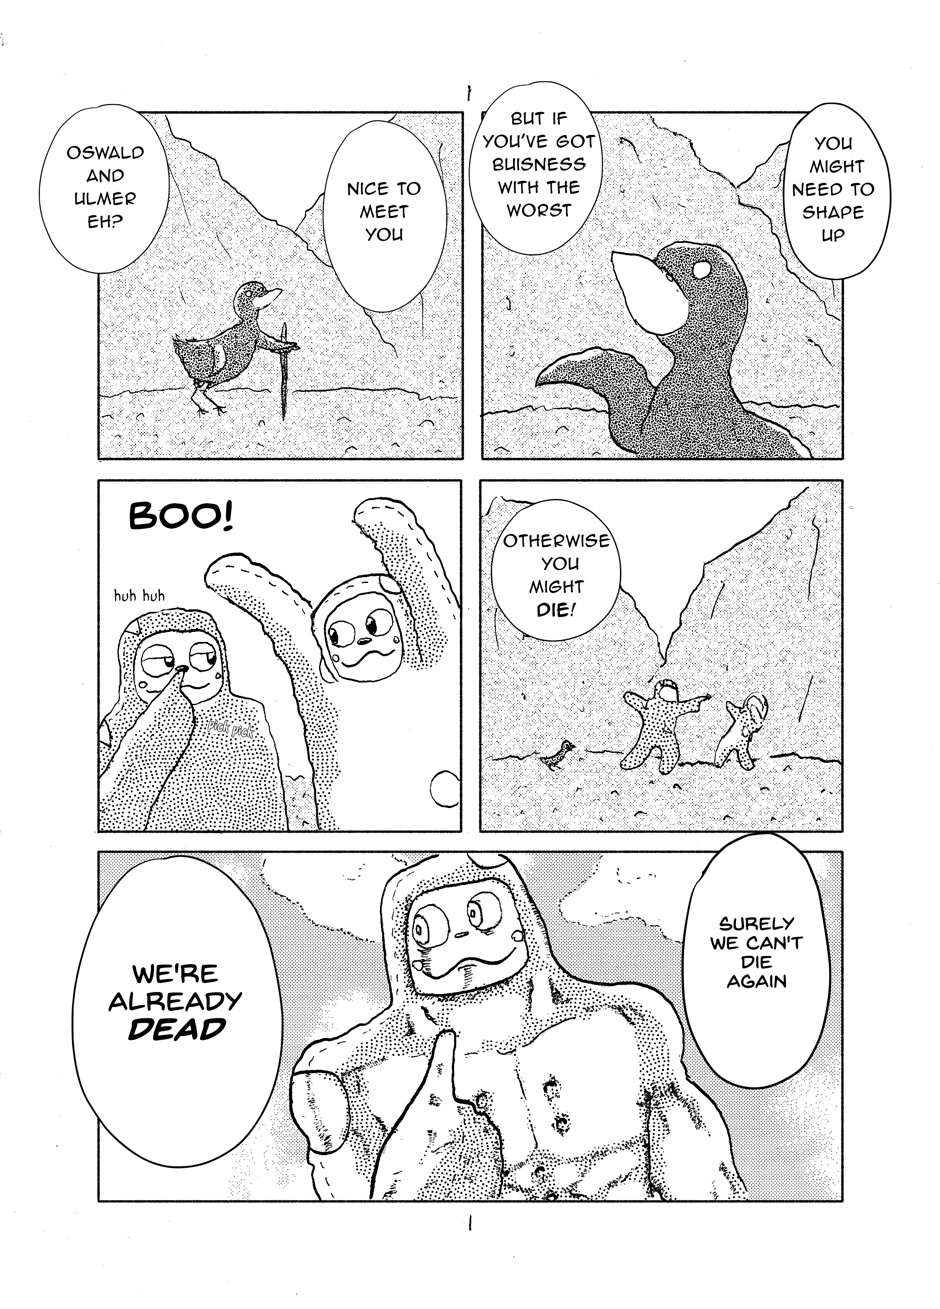 Oswald The Overman In The Lesser Planes Of Hell - Page 1